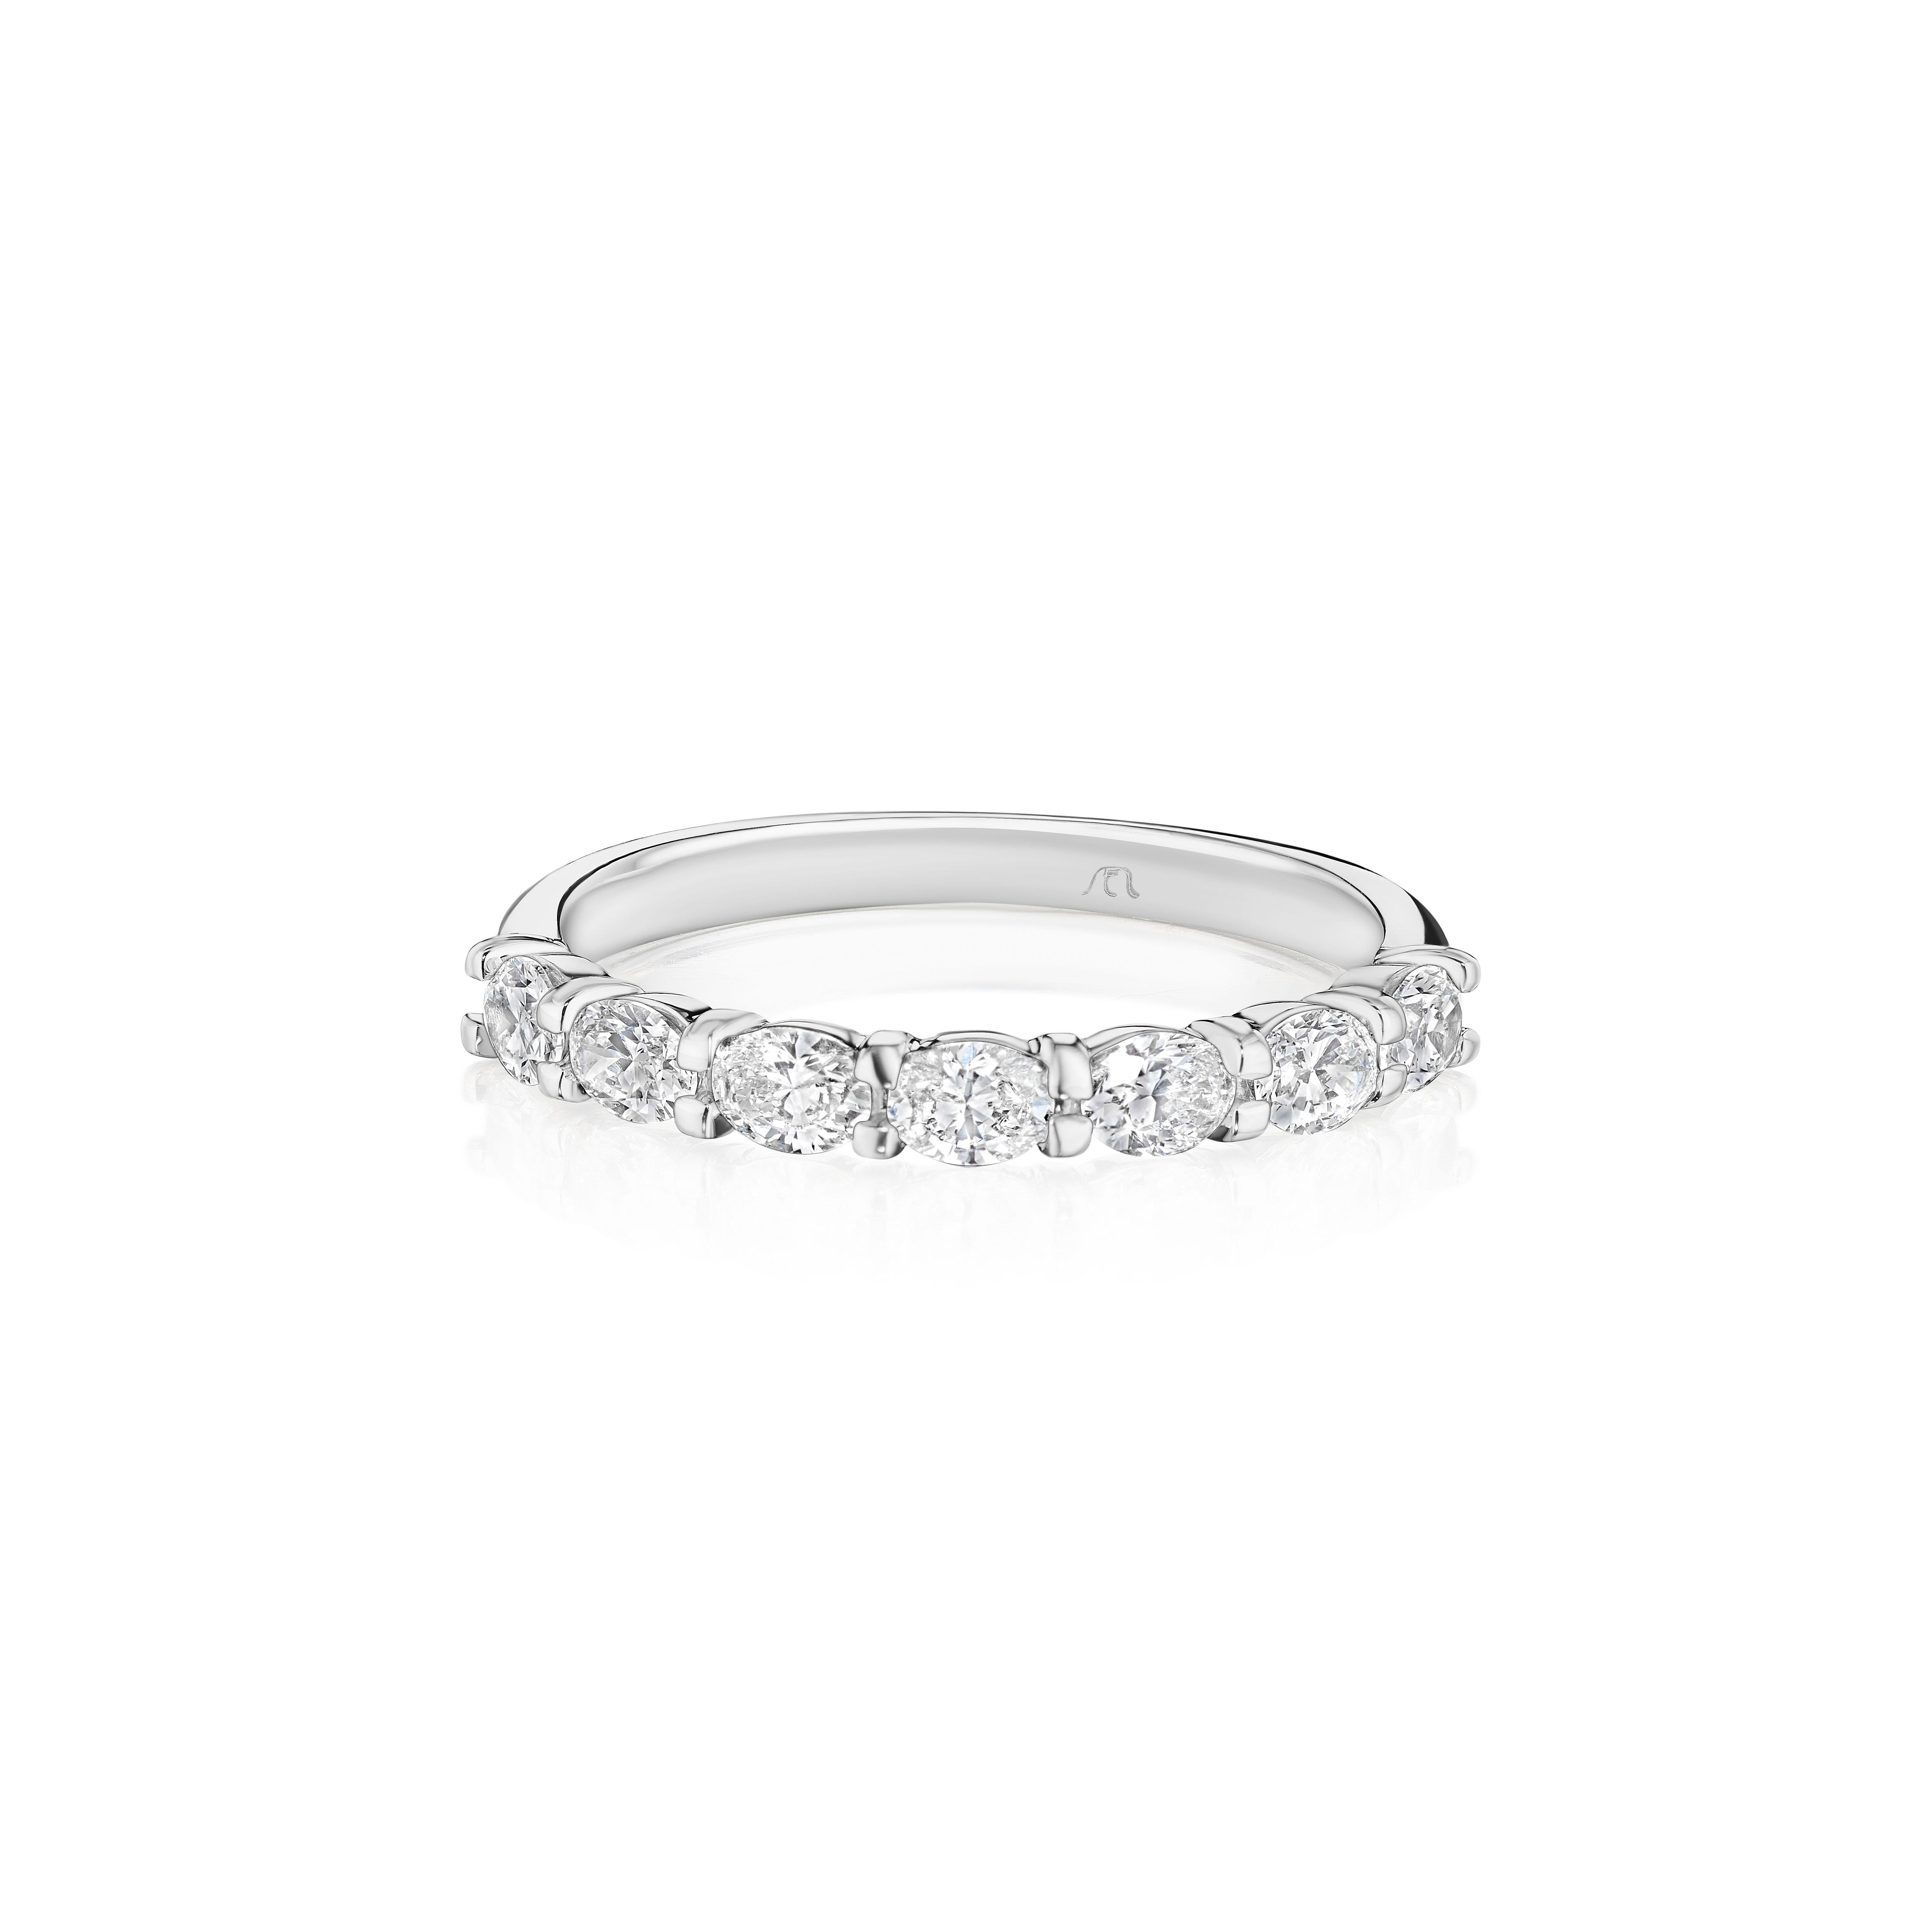 • Crafted in 18KT gold, this band is made with 7 horizontally set oval cut diamonds, and has a combining total weight of approximately 0.70 carats. The diamonds are set into a shared prong cup setting. Worn beautifully on its own or stacked. A